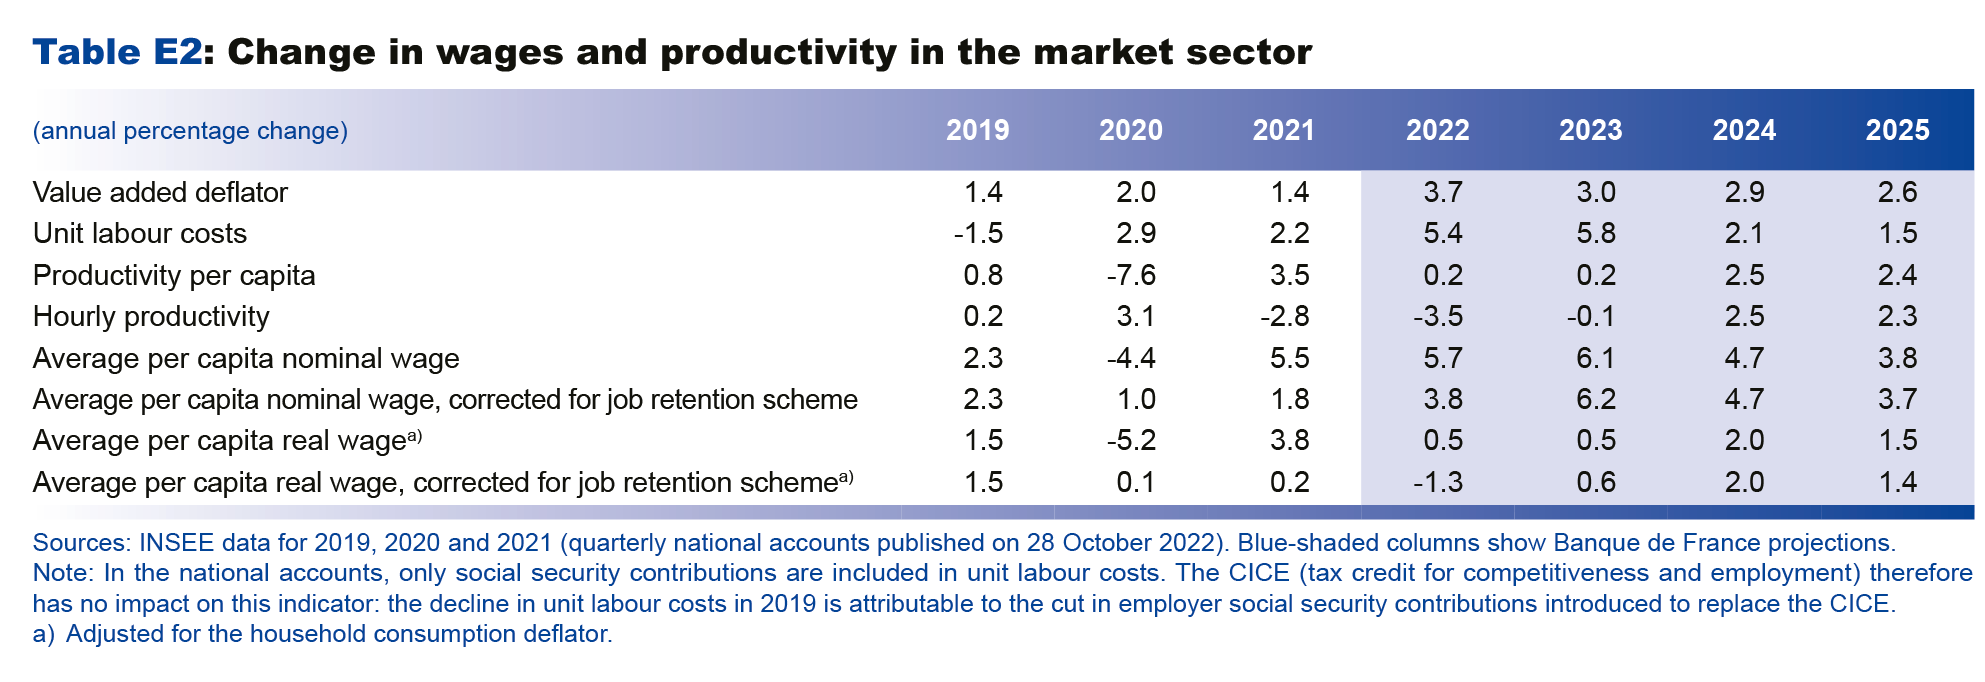 Macroeconomic projections – December 2022 - Change in wages and productivity in the market sector